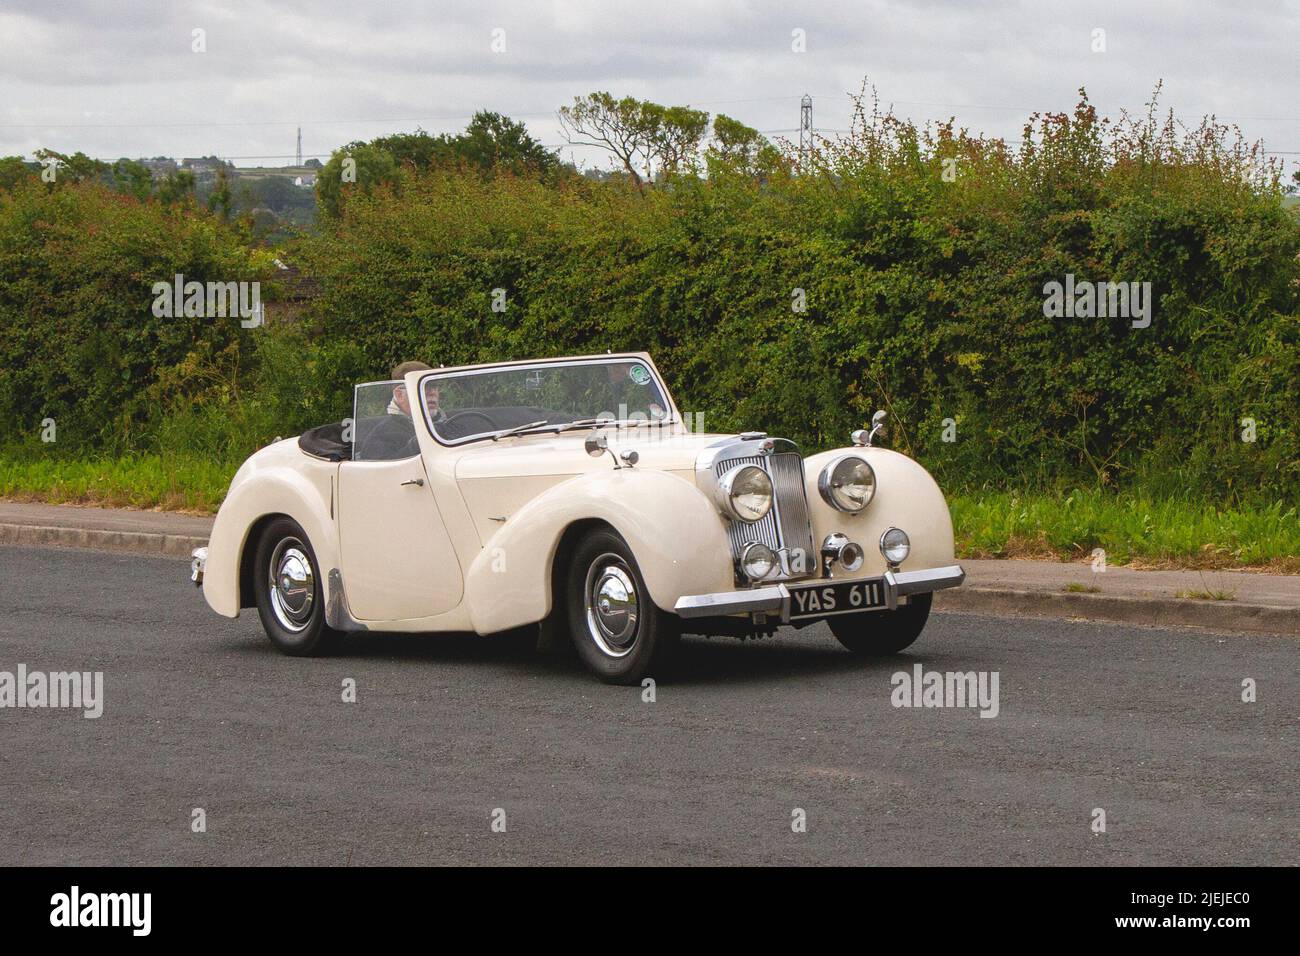 1947 forties 40s cream Triumph 1776cc sports car; en-route to Hoghton Tower for the Supercar Summer Showtime car meet which is organised by Great British Motor Shows in Preston, UK Stock Photo